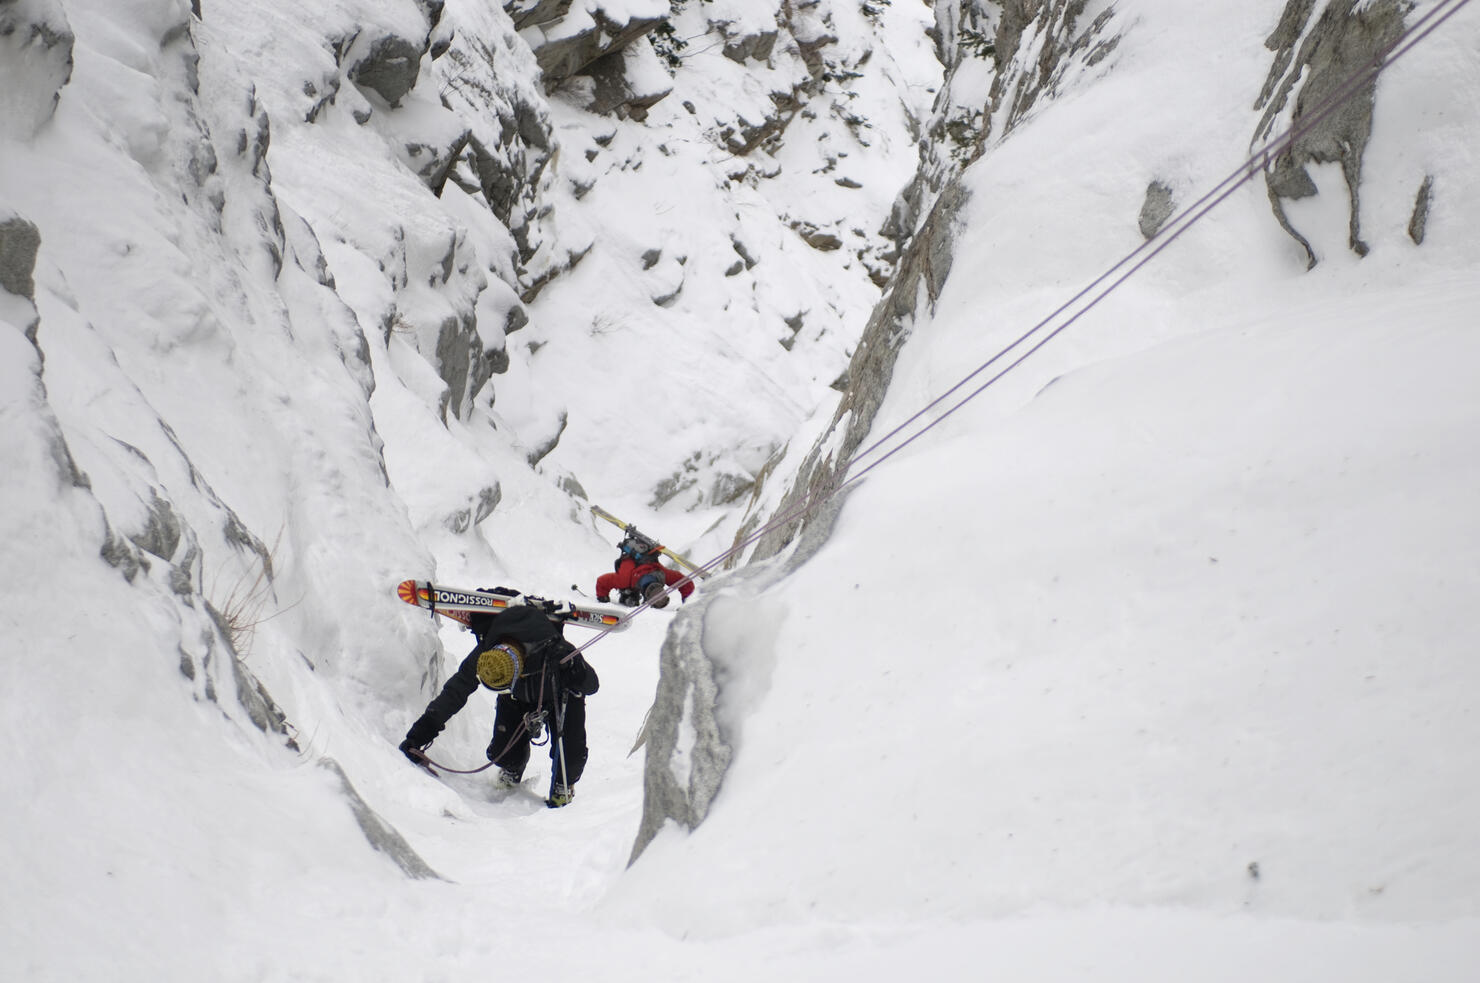 Backcountry skiers climbing down into the Y-Not Couloir in the Wasatch Mountains